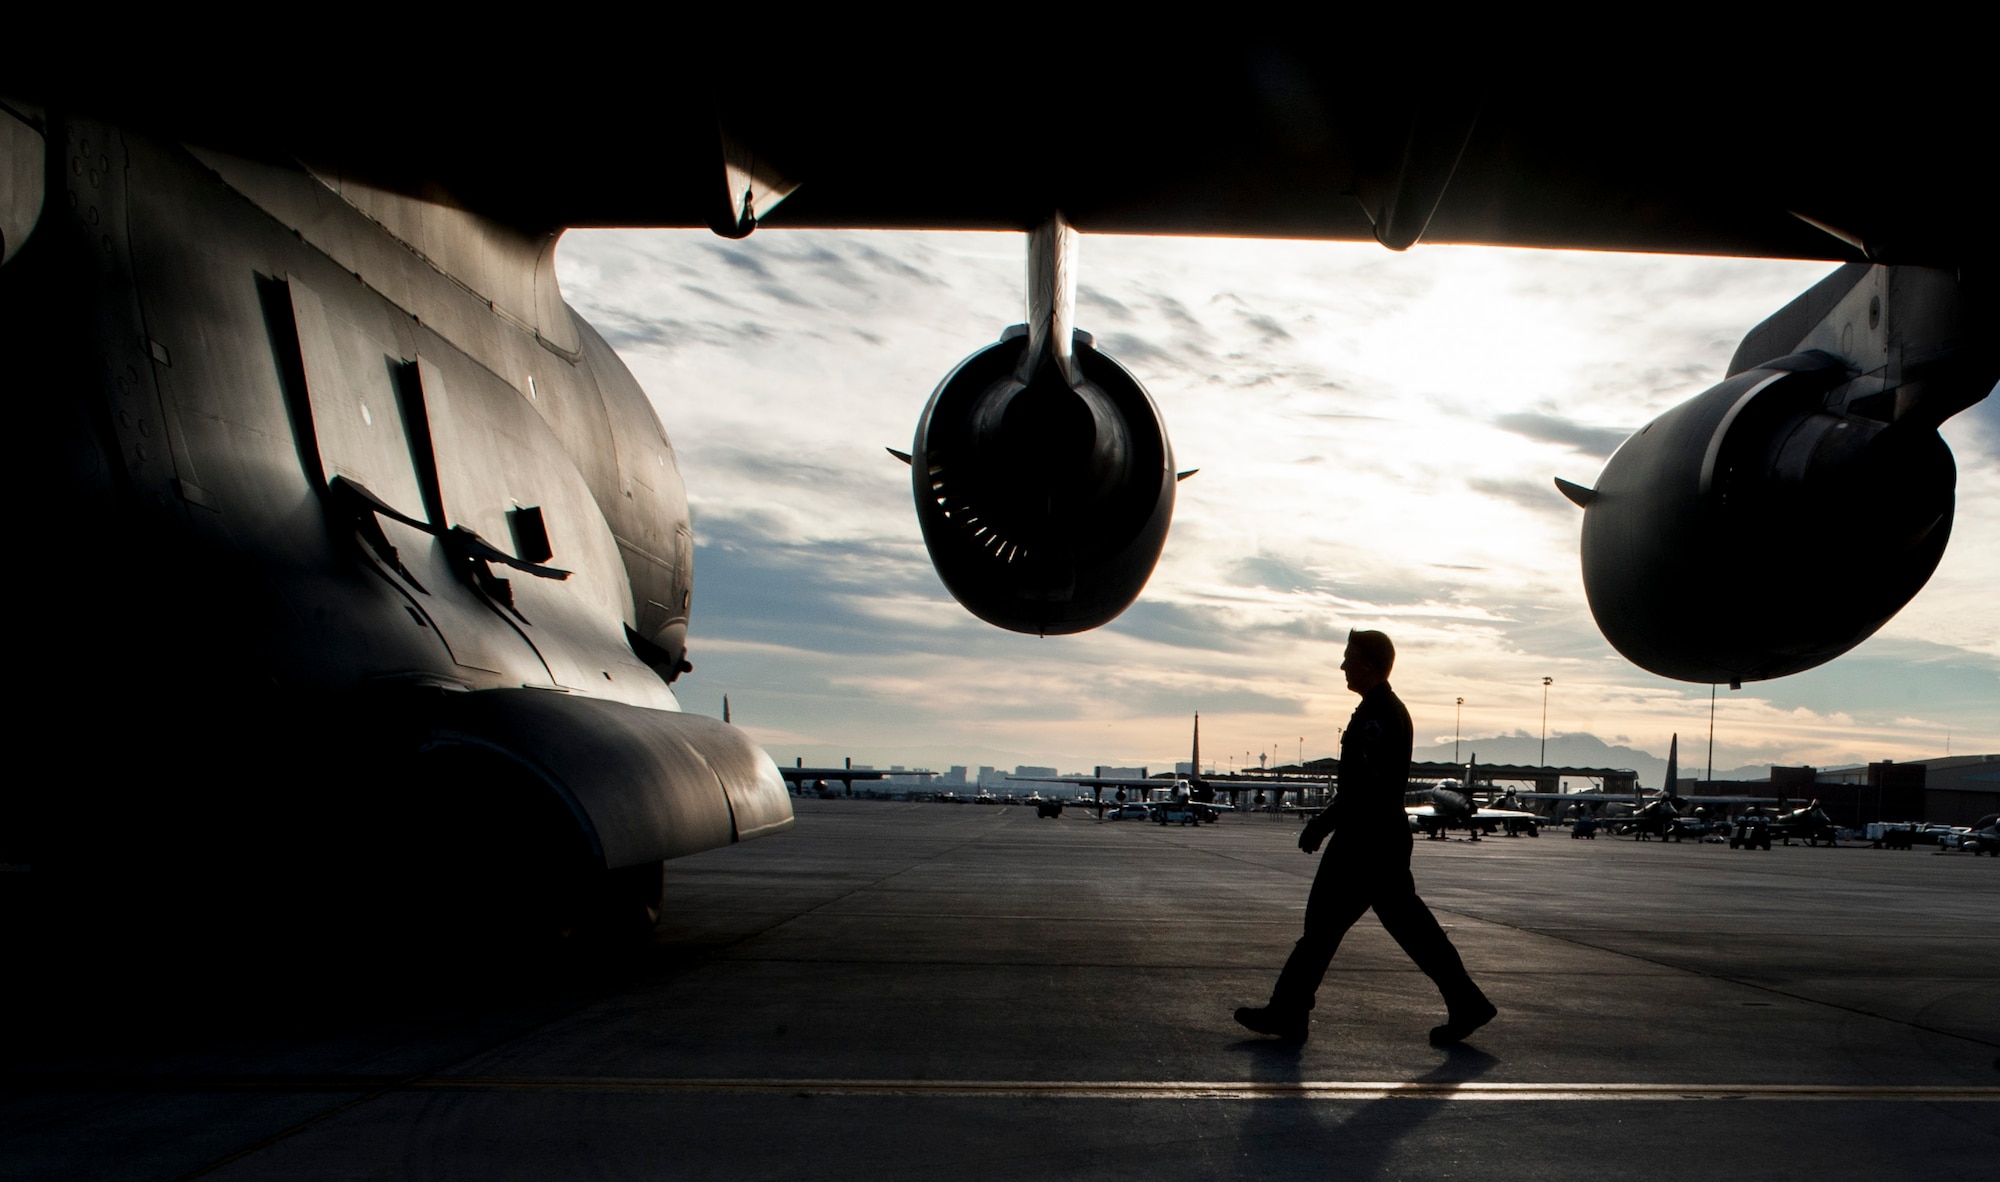 Capt. Dan “Filter” Naske, 57th Weapons Squadron pilot, performs an exterior check of a C-17 Globemaster III prior to take-off on Nellis Air Force Base, Nev., Dec. 10, 2016. The C-17 is capable of rapid strategic delivery of troops and all types of cargo to main operating bases or directly to forward bases in the deployment area. (U.S. Air Force photo by Airman 1st Class Kevin Tanenbaum)